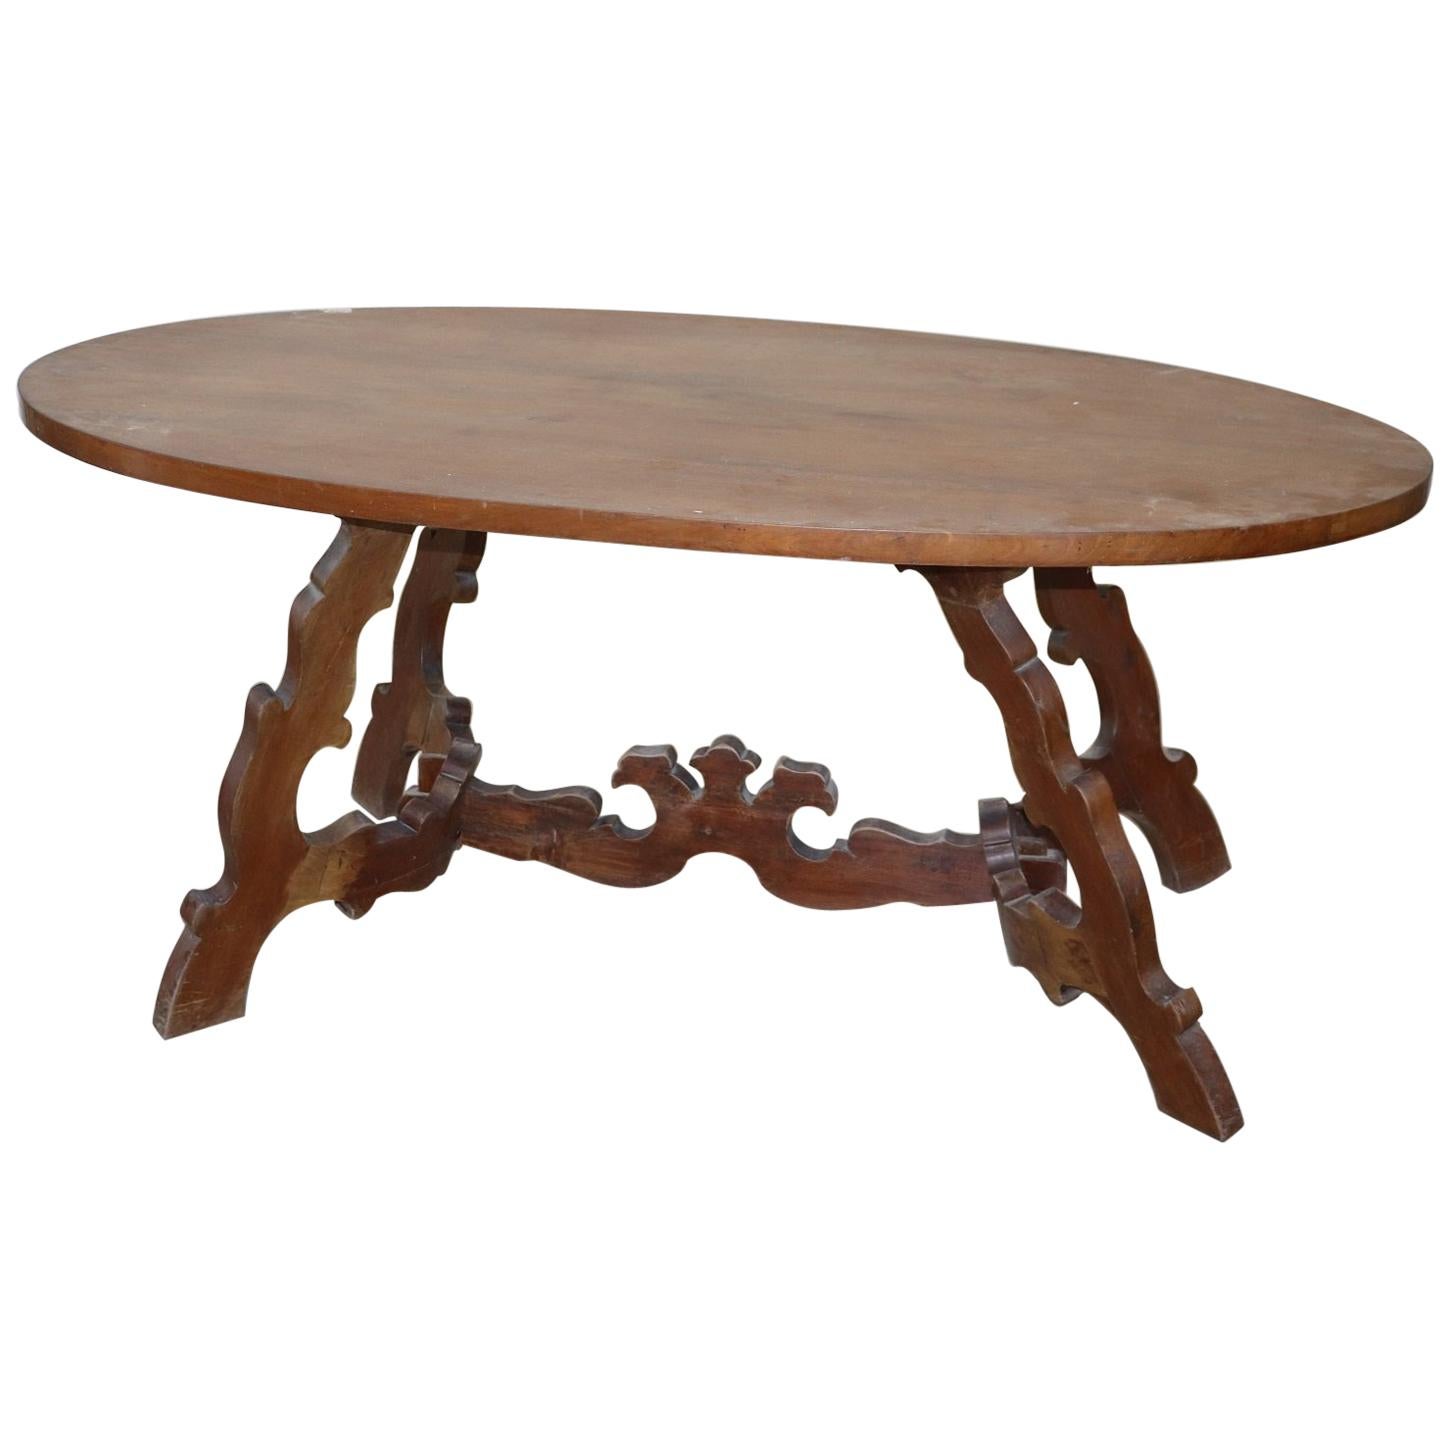 20th Century Italian Fratino Walnut Wood Oval Table with Lyre-Shaped Legs